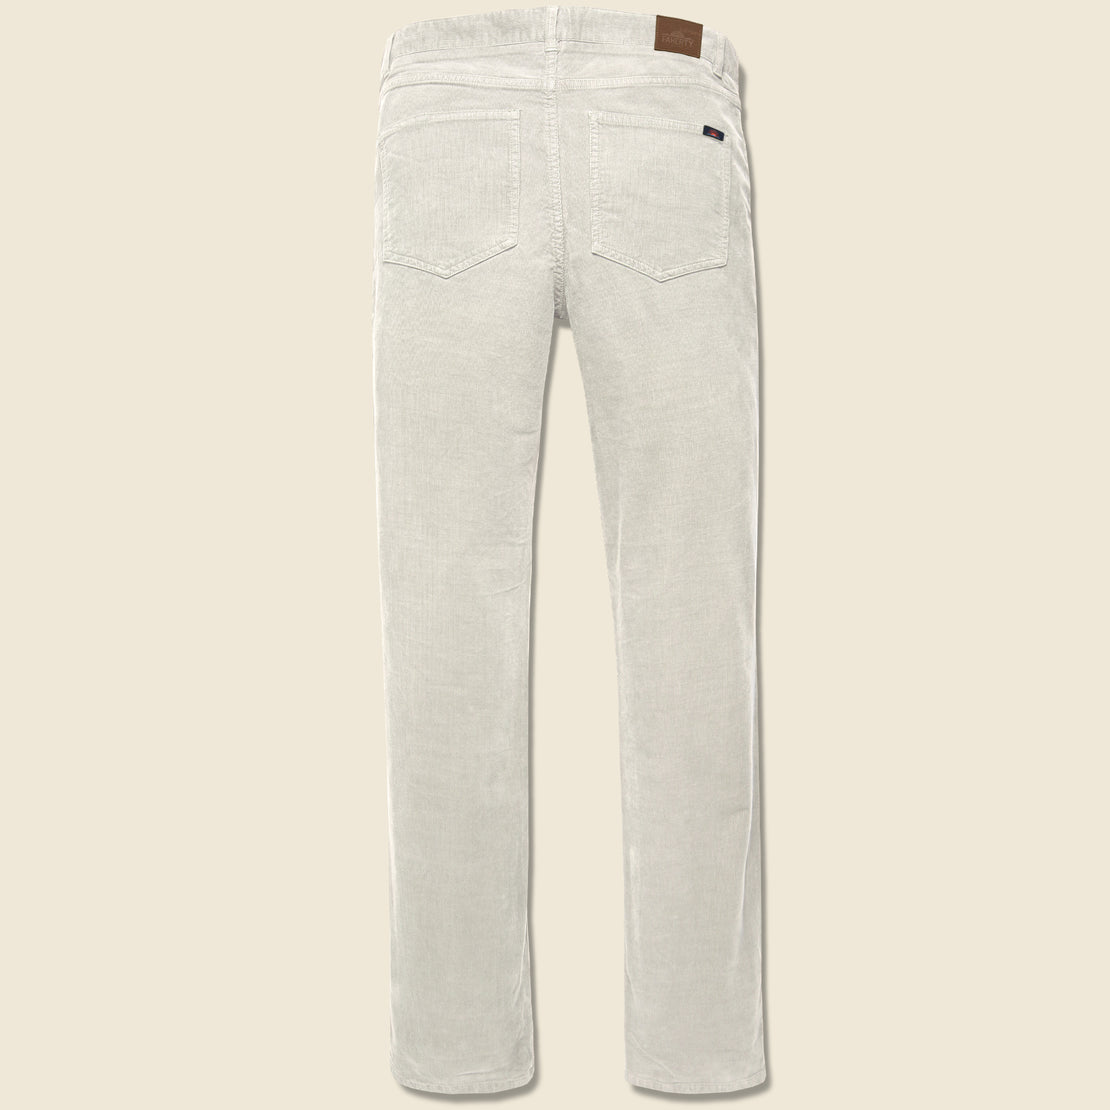 Stretch Corduroy Pant - Winter Tundra - Faherty - STAG Provisions - Pants - Corduroy